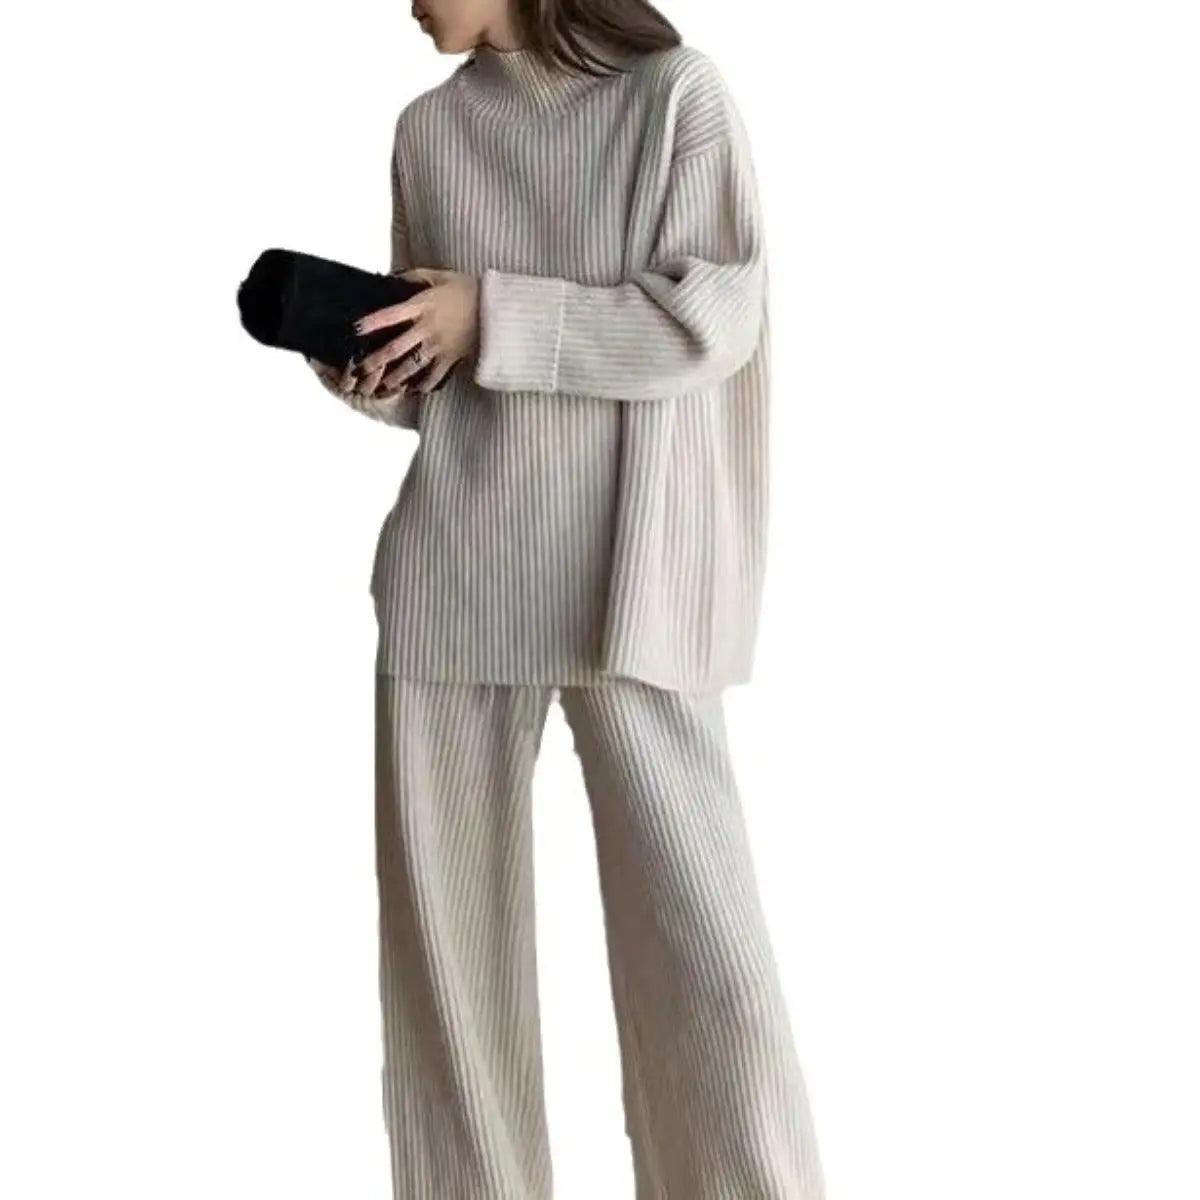 MS018 2 Piece Outfits Casual Loose Turtleneck Long Sleeve Knit Top and Wide Leg Pants - Mariam's Collection